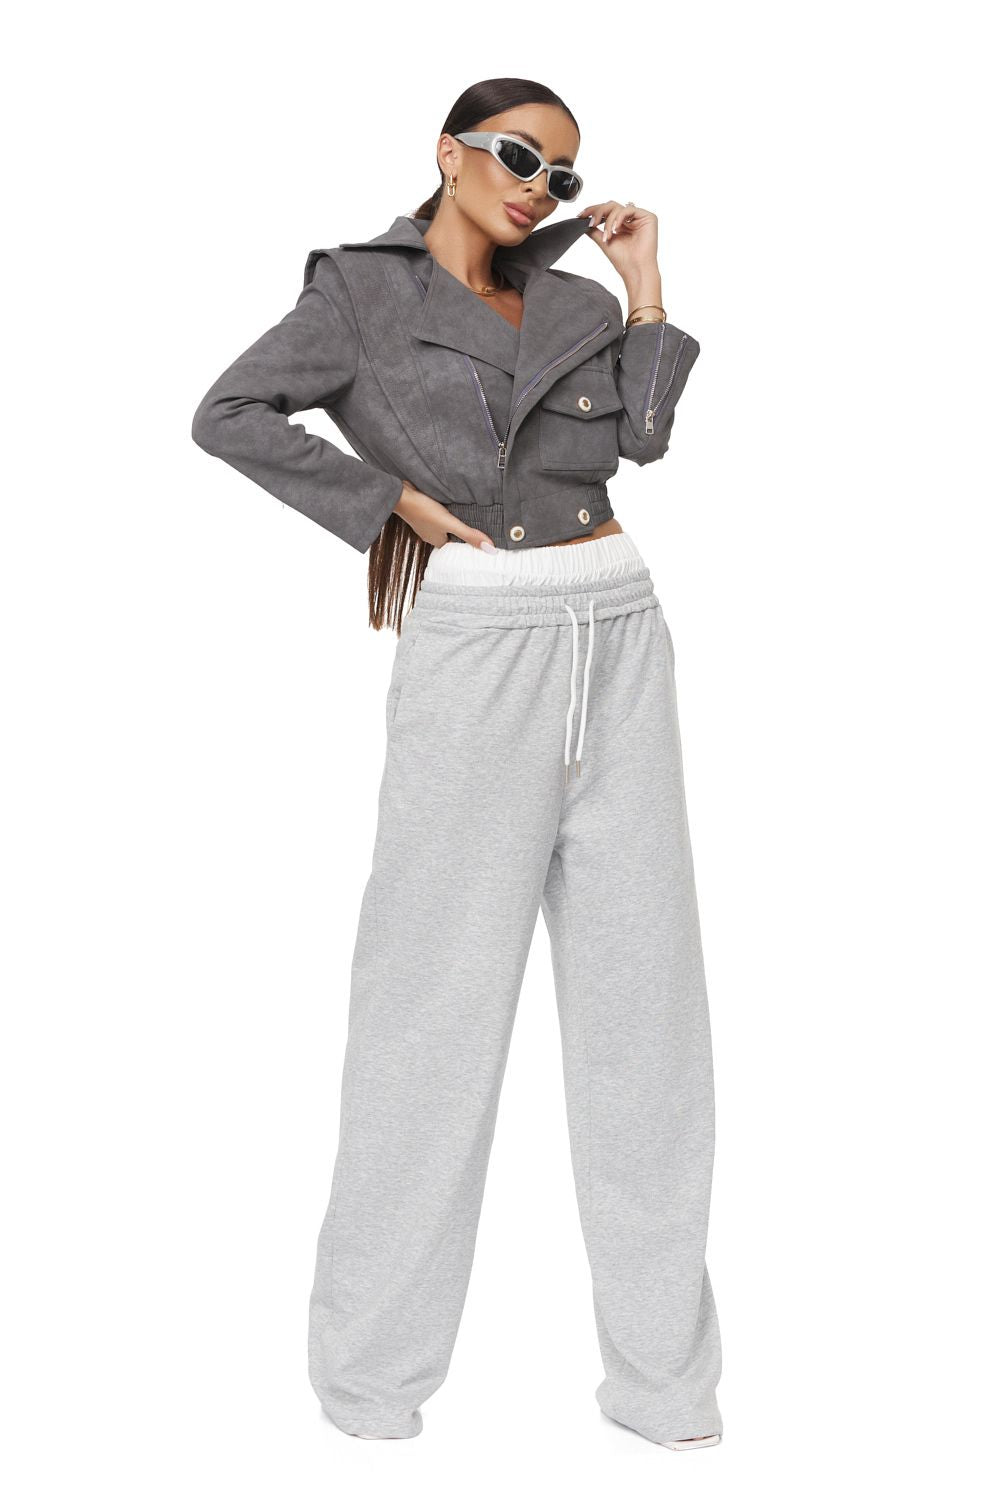 Visay Bogas grey casual ladies trousers